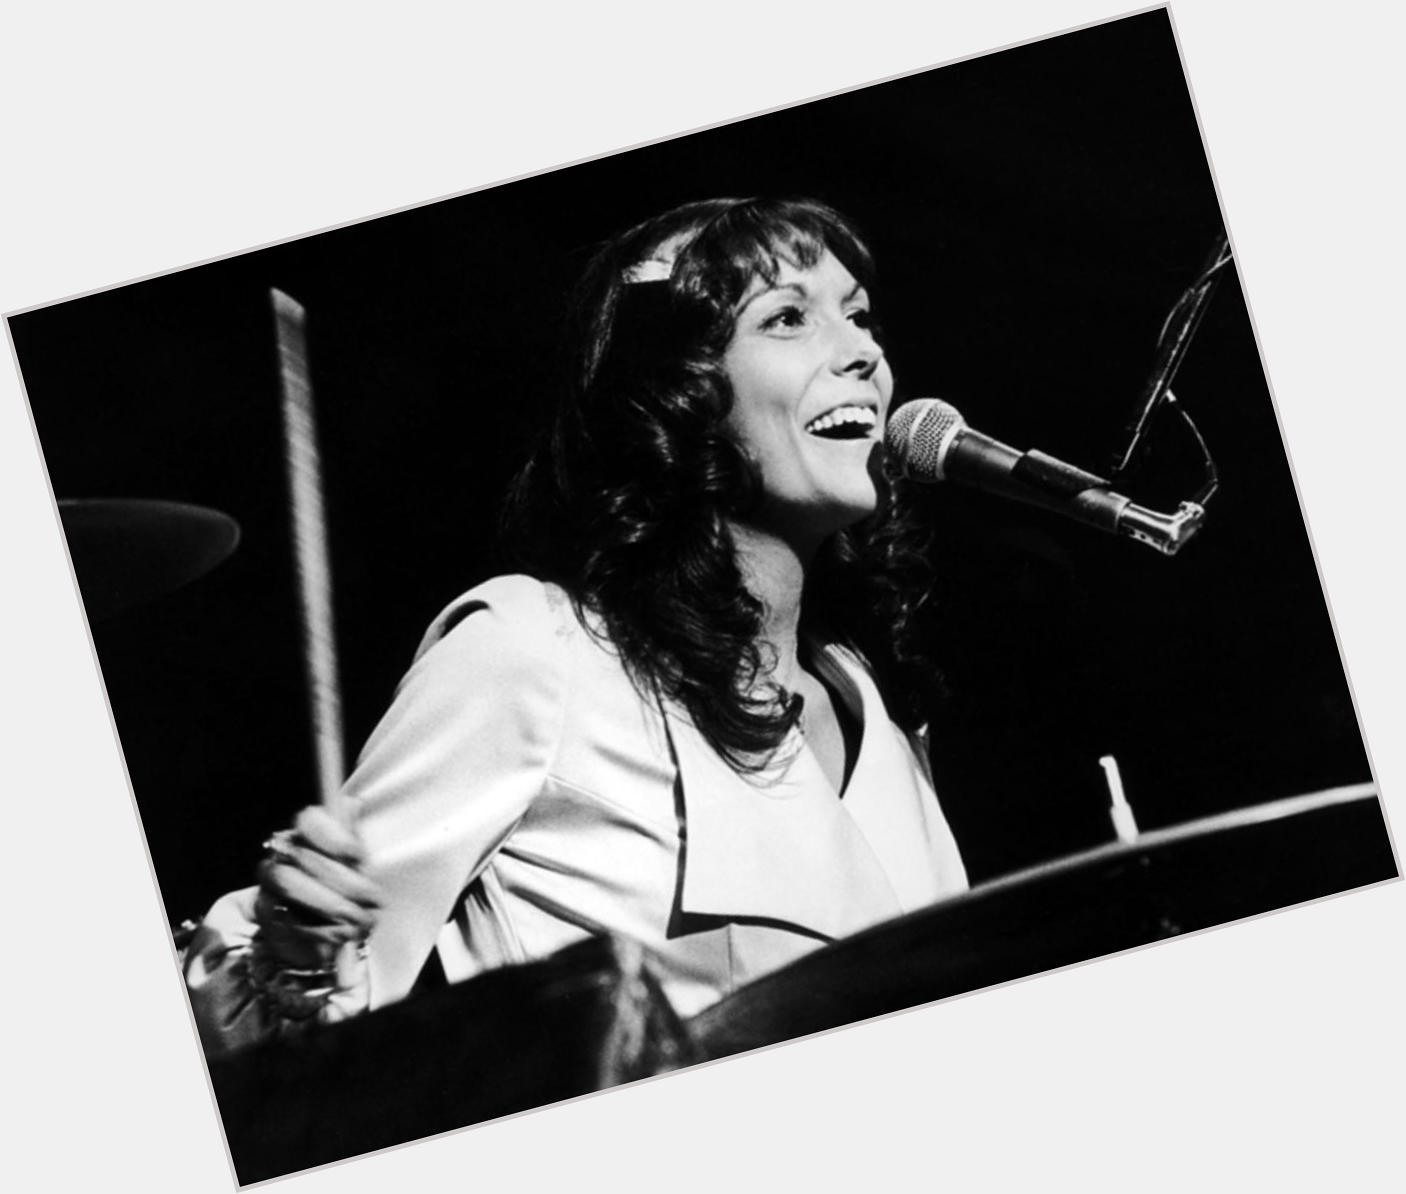 Happy Birthday to Karen Carpenter, who would have turned 65 today! 